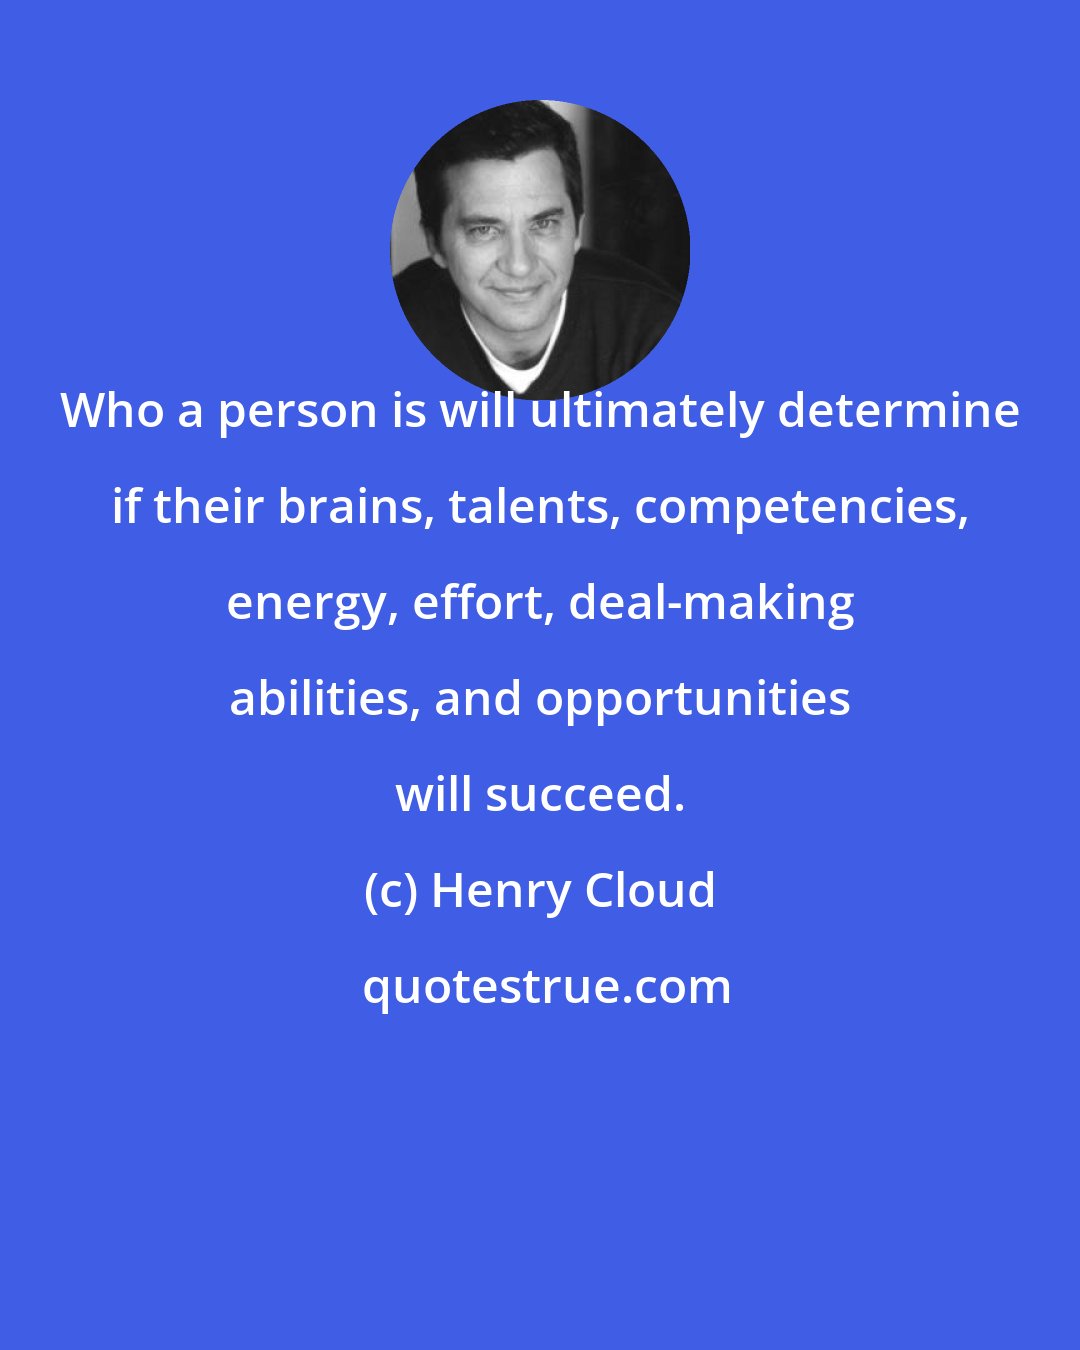 Henry Cloud: Who a person is will ultimately determine if their brains, talents, competencies, energy, effort, deal-making abilities, and opportunities will succeed.